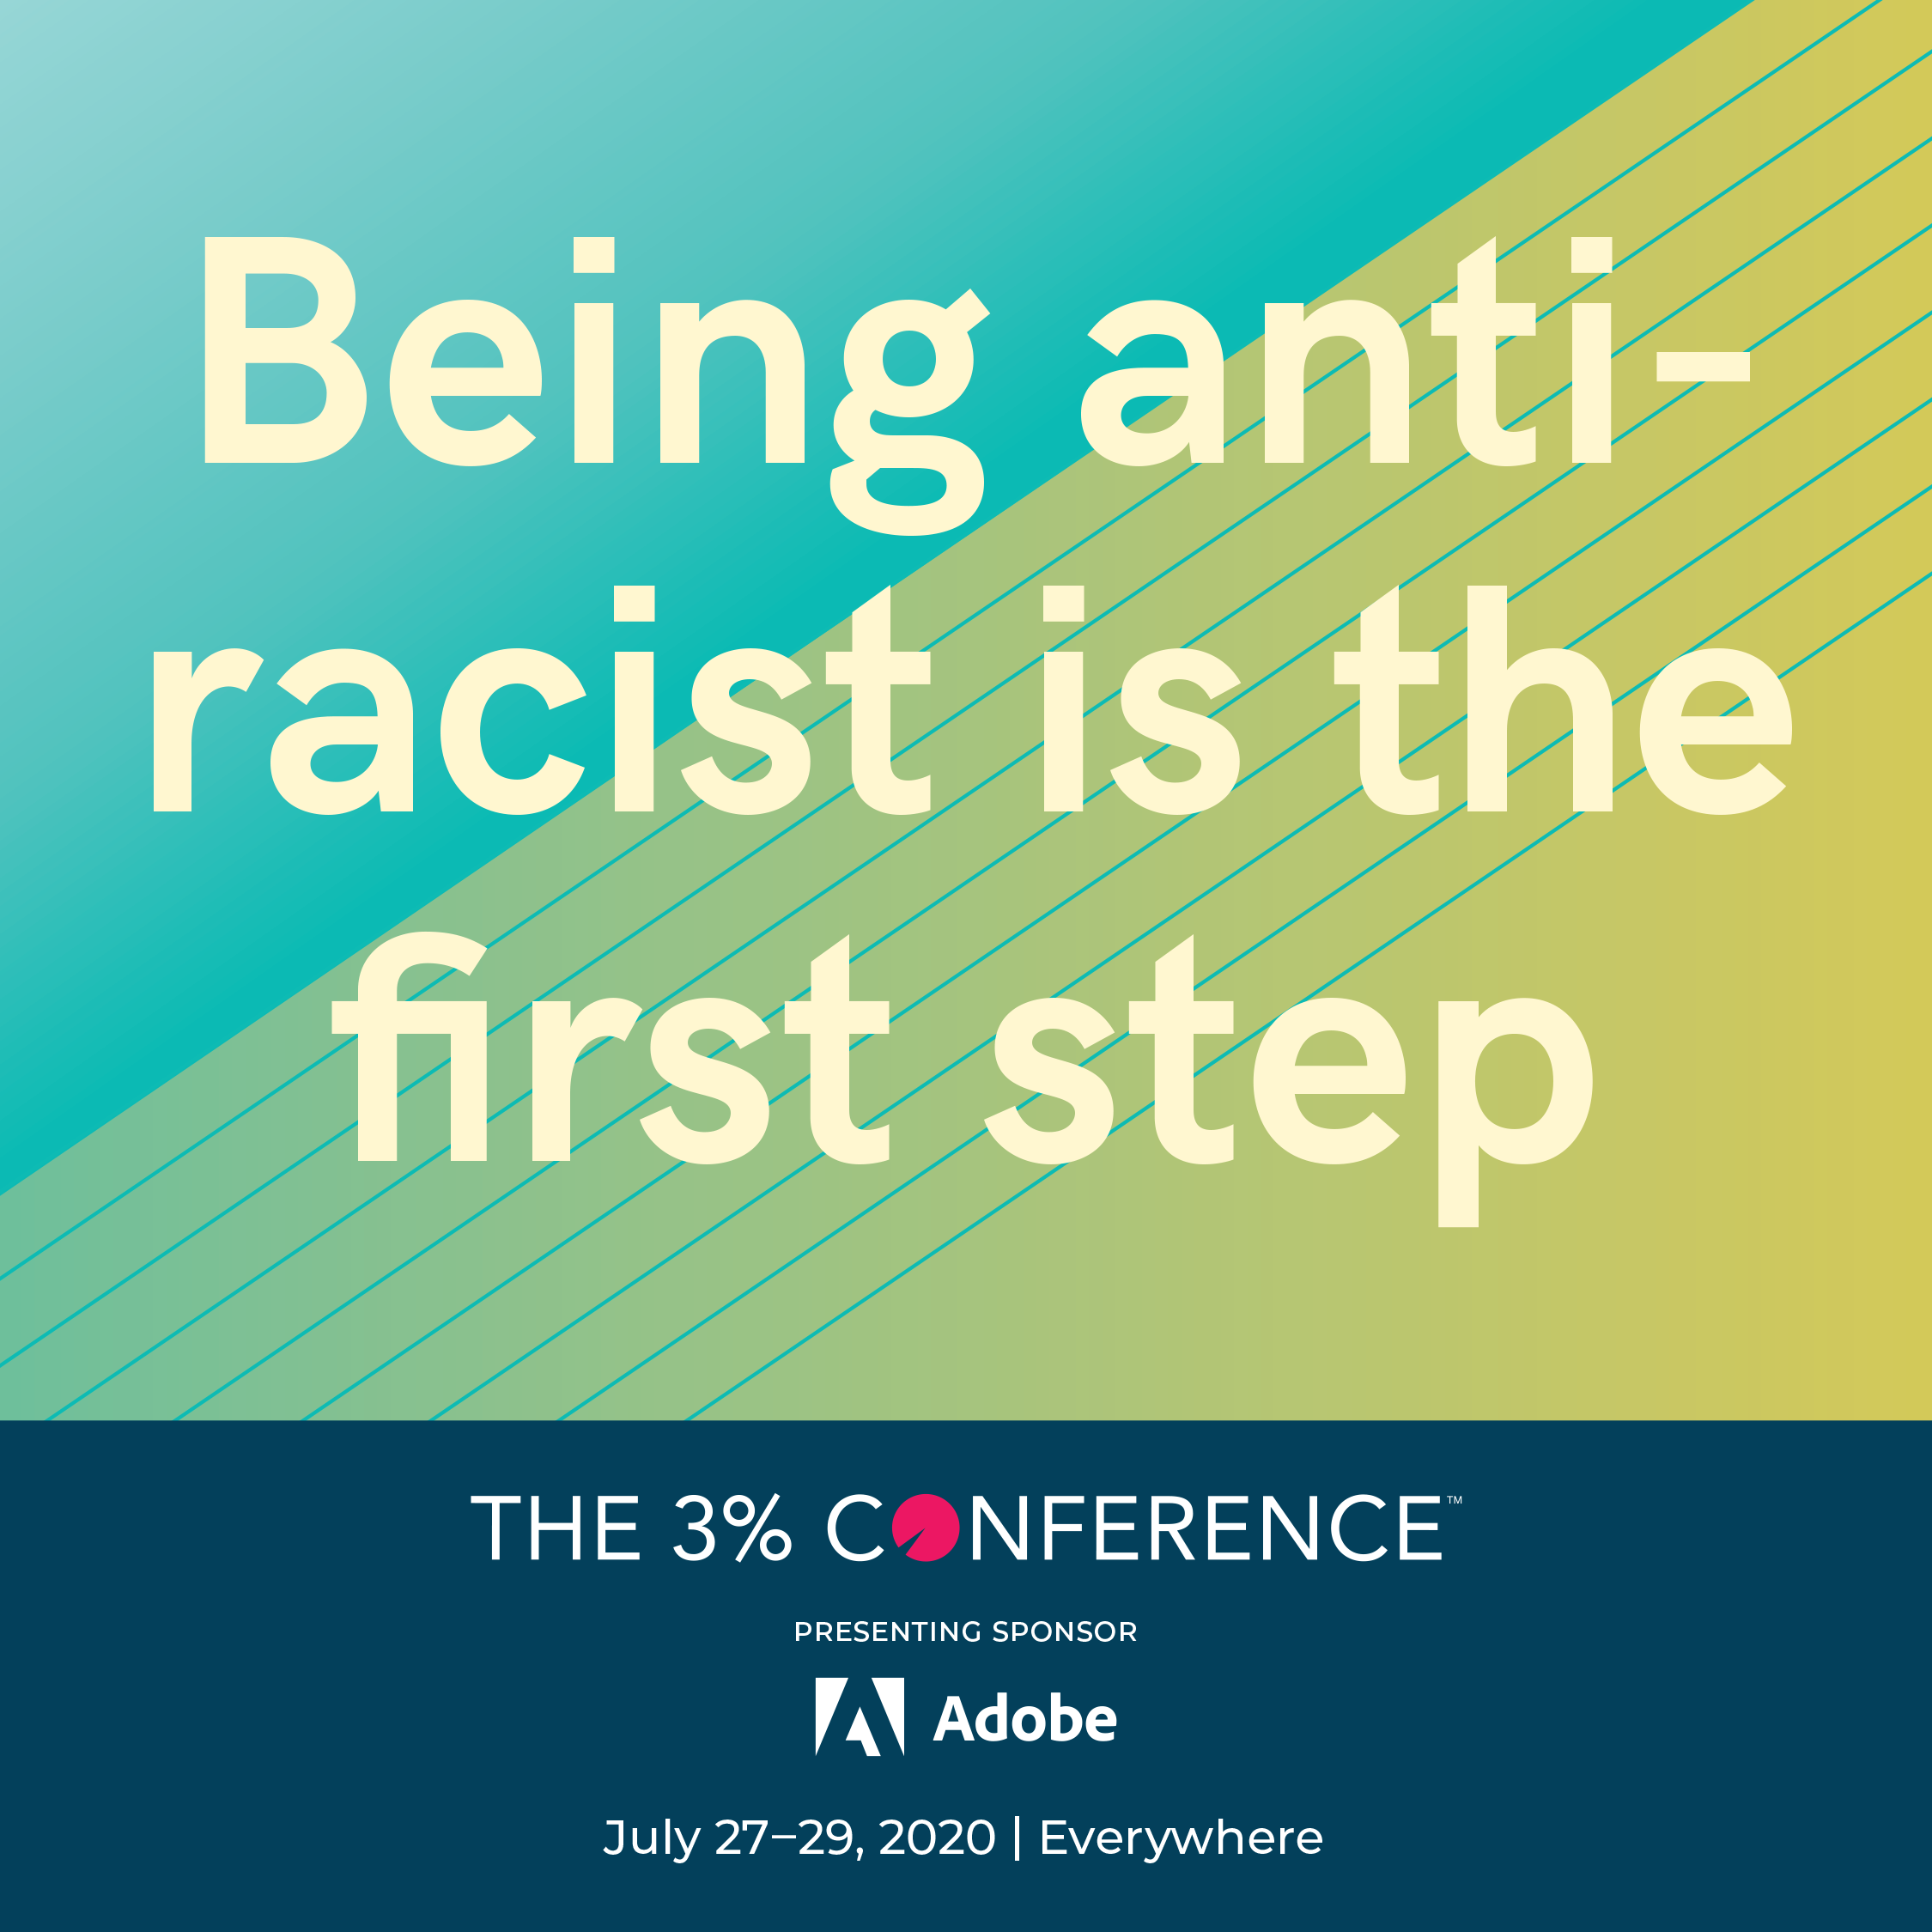 Being antiracist is the first step. The 3% Conference ~ The Radically Inclusive Future of Work, July 27-29, 2020